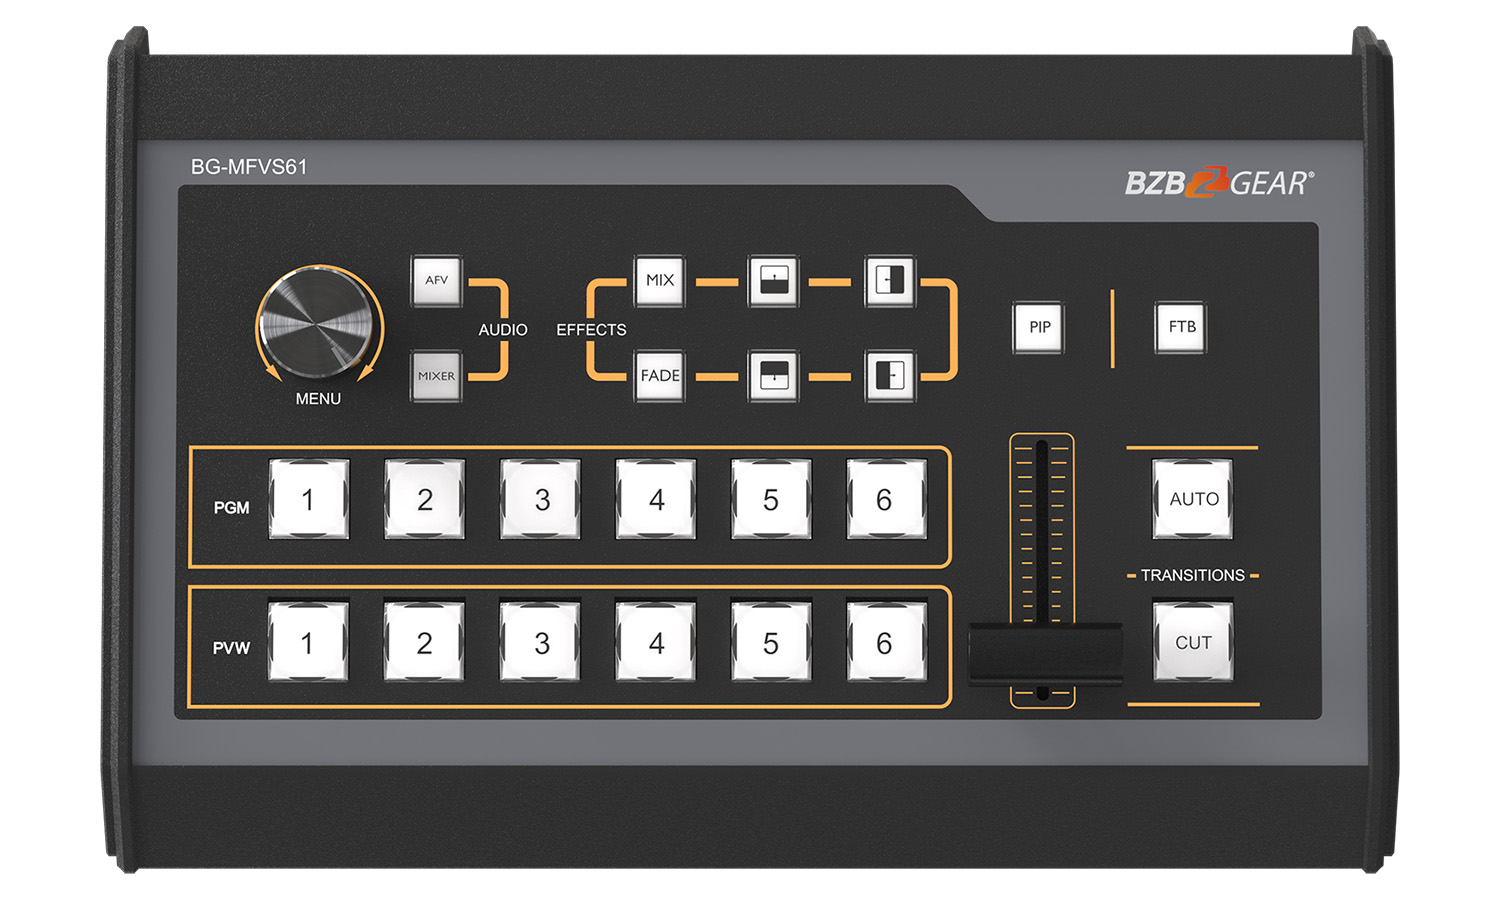 BG-MFVS61-G2 6-Channel/Input 3G-SDI and HDMI Live Streaming Video/Audio Production Switcher and Mixer with Integrated Capture Card by BZBGEAR